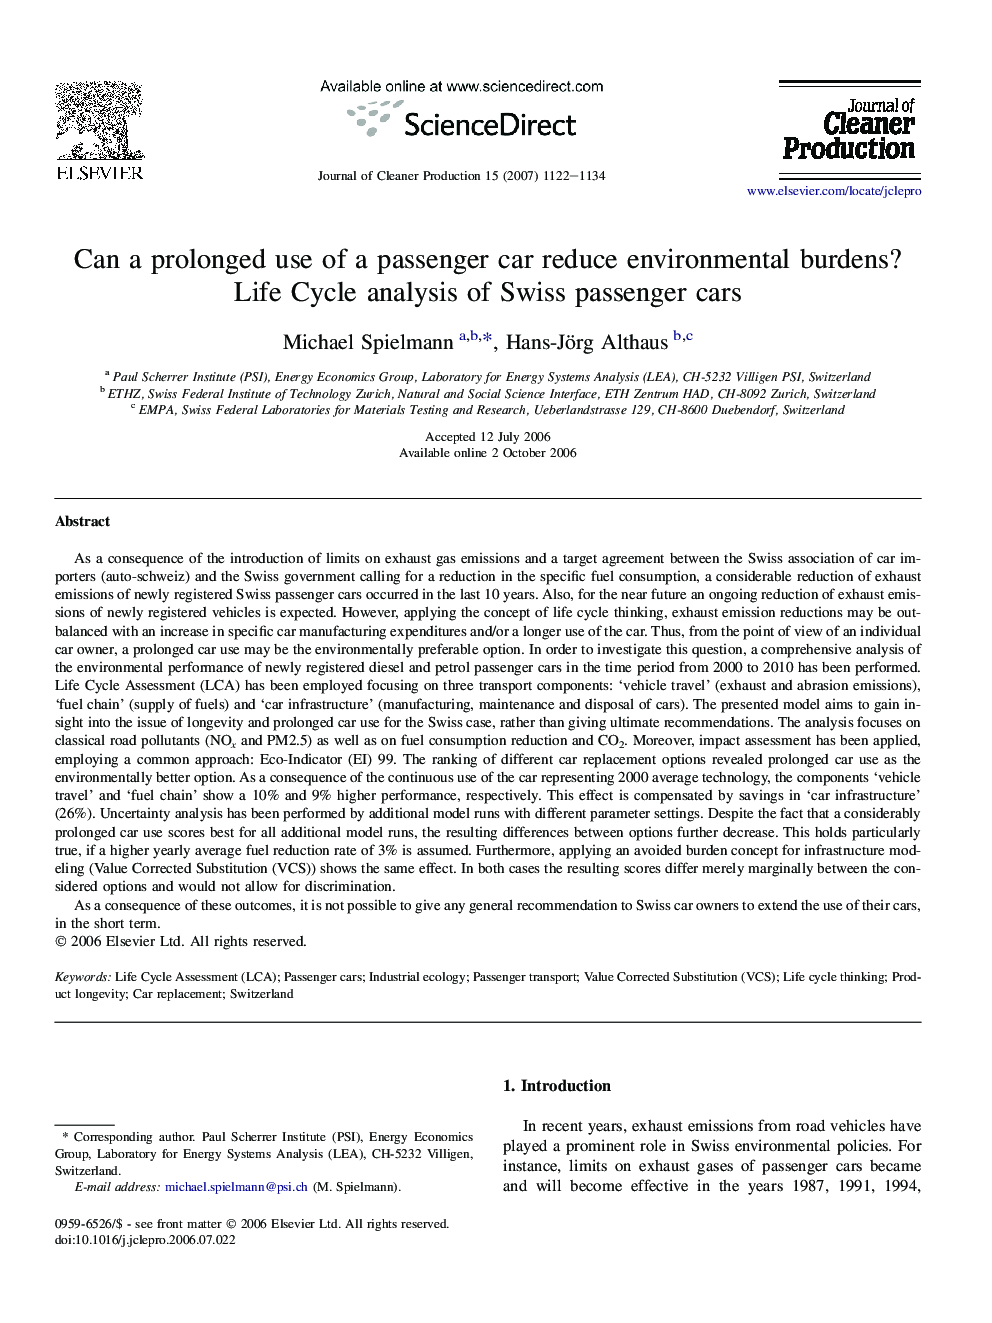 Can a prolonged use of a passenger car reduce environmental burdens? Life Cycle analysis of Swiss passenger cars